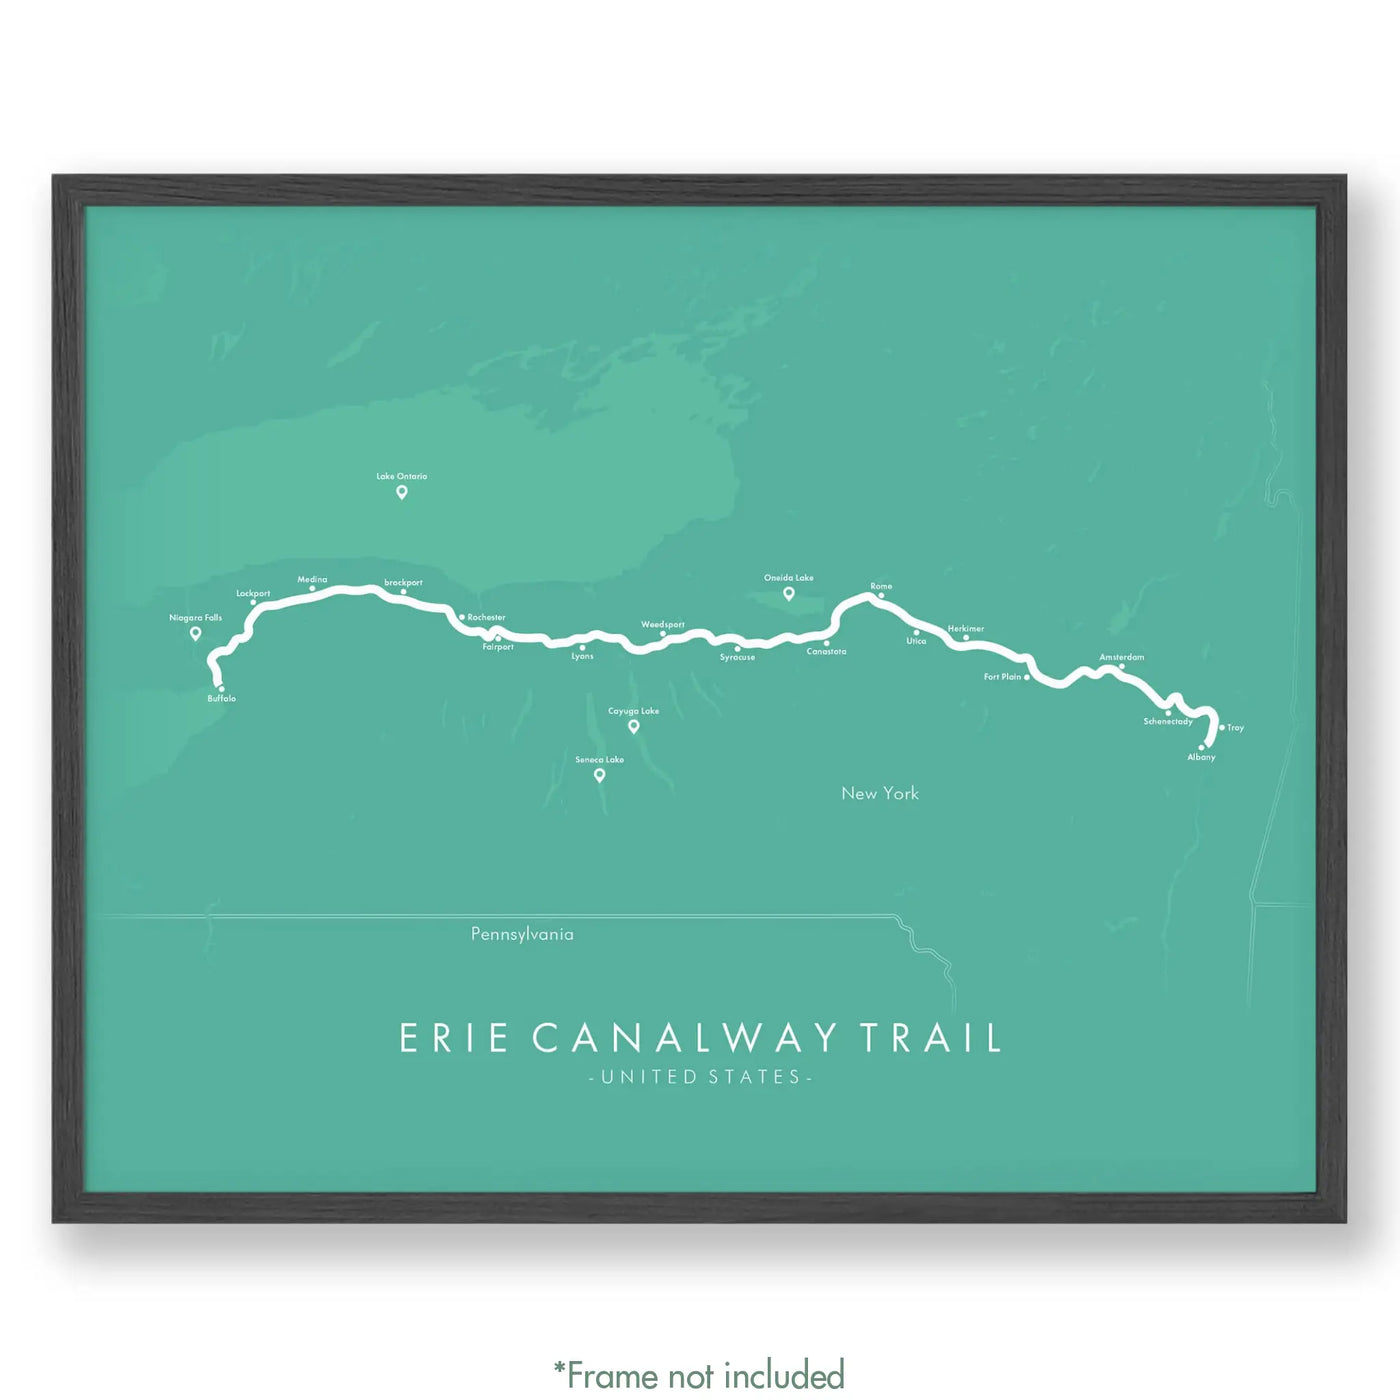 Trail Poster of Erie Canalway Trail - Teal